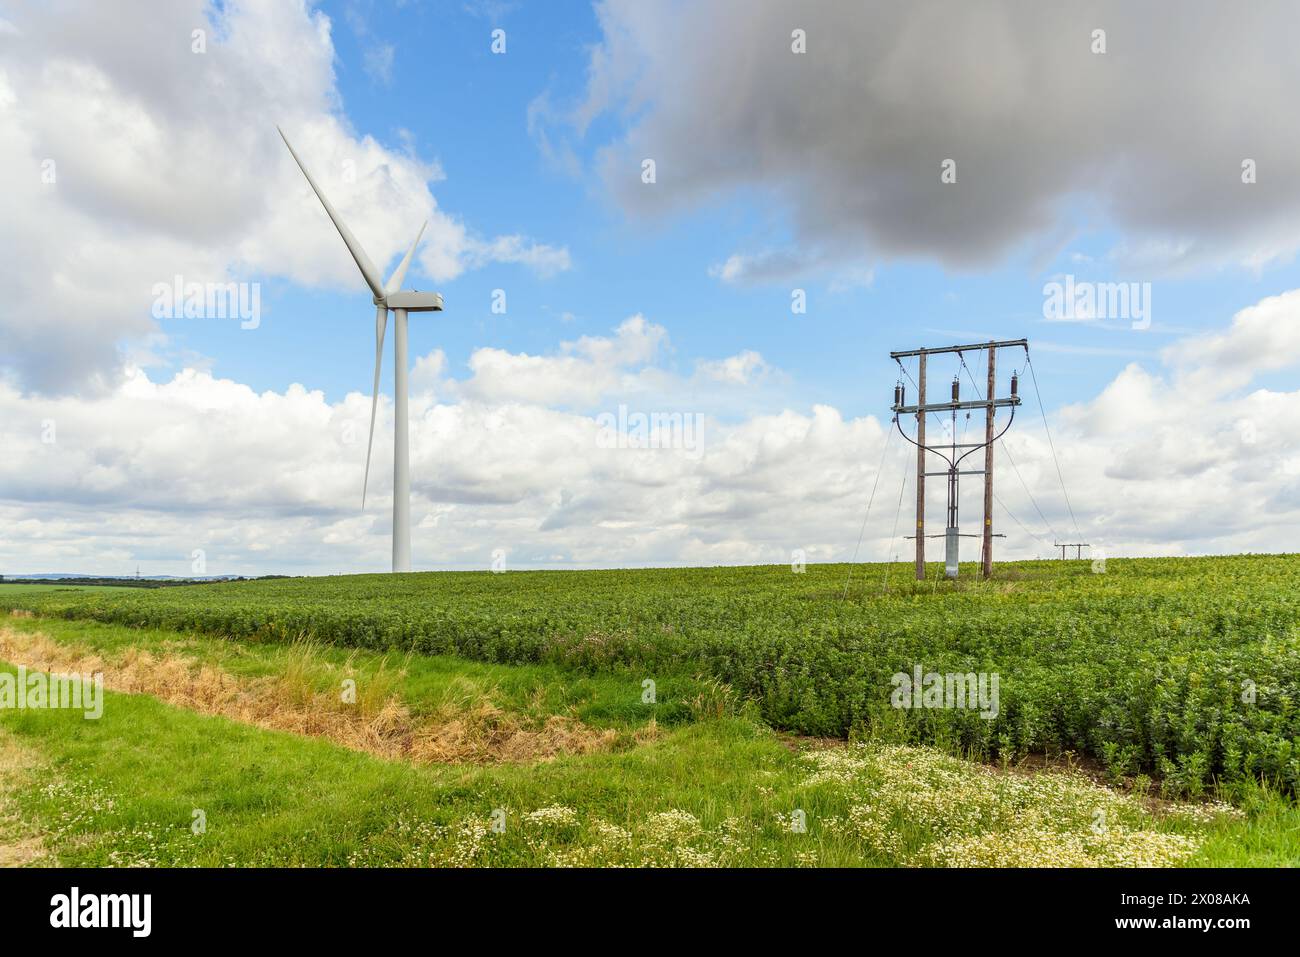 Wind turbine and electricity lines on a cultivated field in the countryside on a partly cloudy summer day Stock Photo